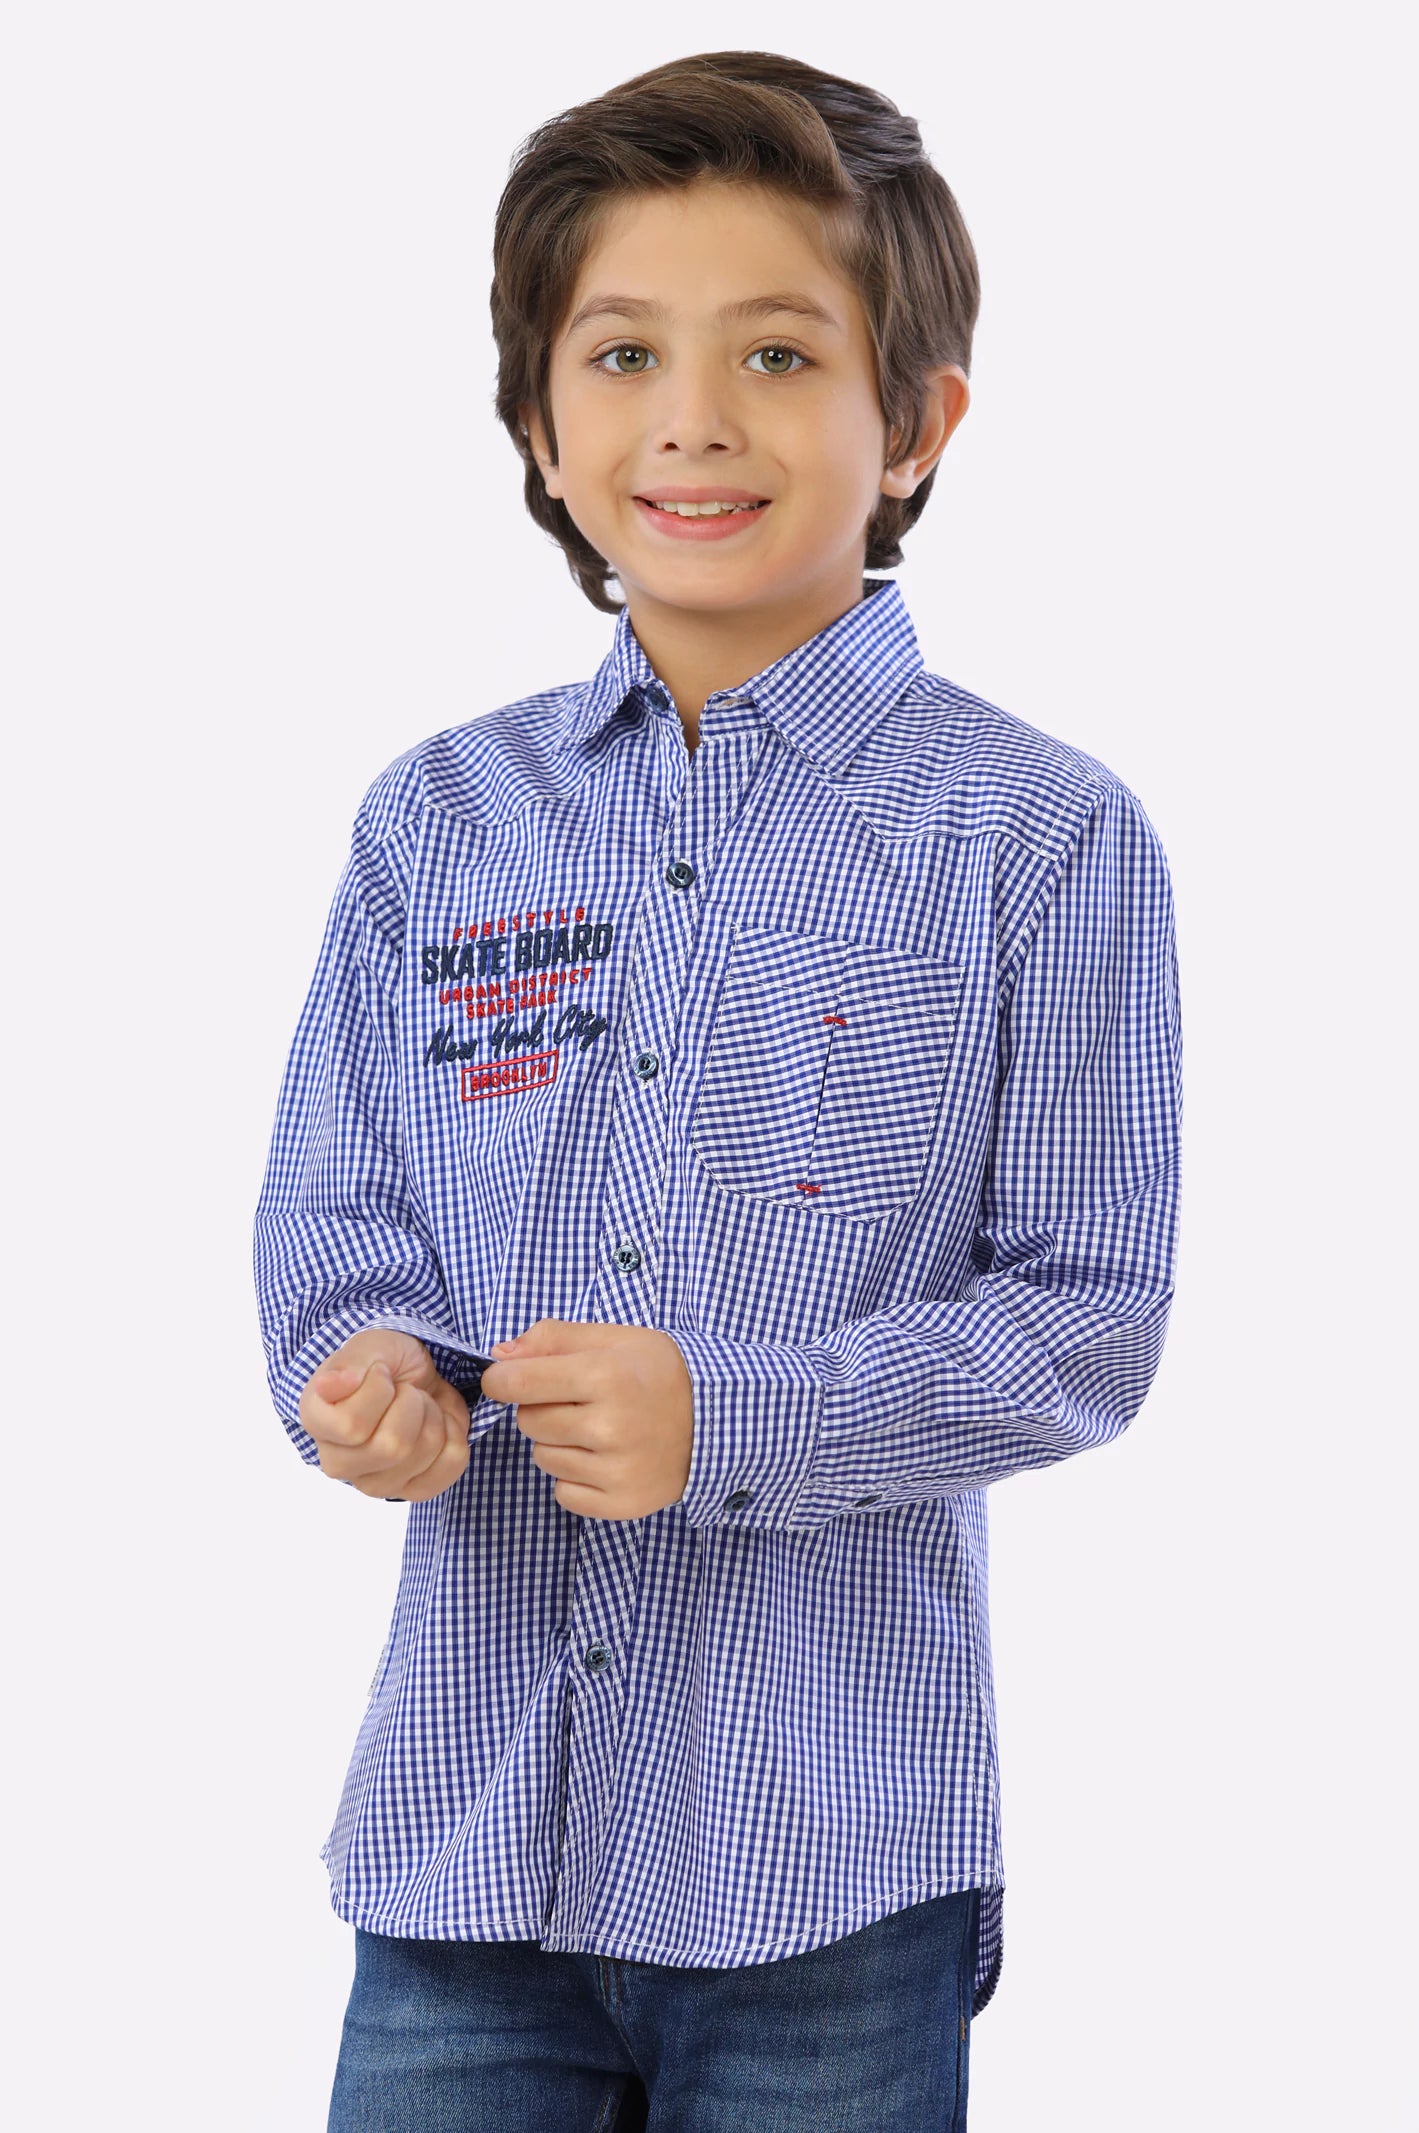 Royal Blue Mini-Check Boys Shirt From Diners